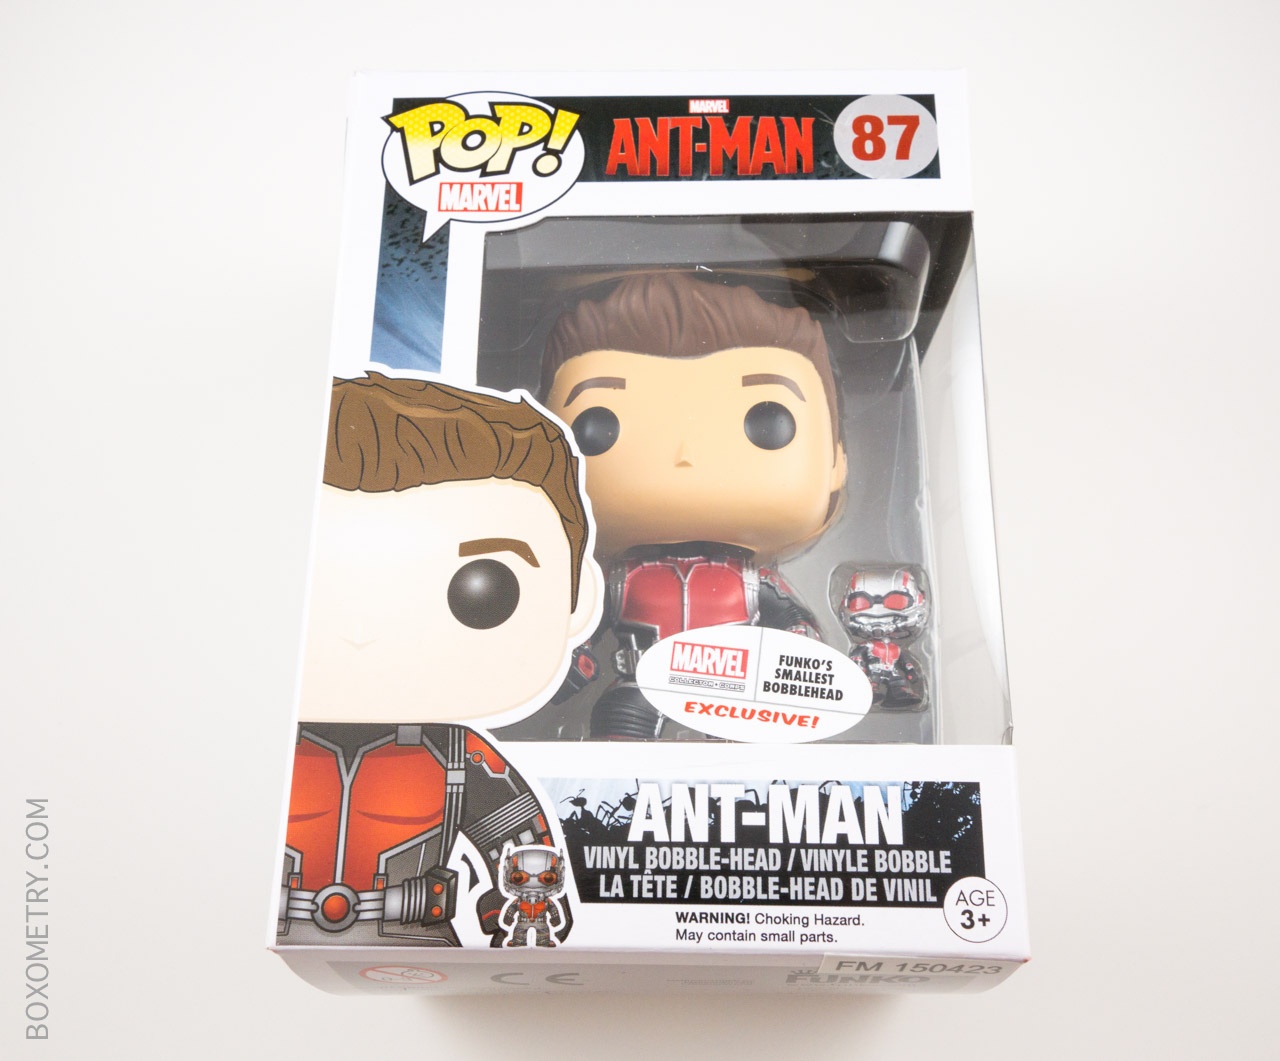 Boxometry Marvel Collector Corps June 2015 Review - Exclusive Funko POP Ant-Man Vinyl Figure